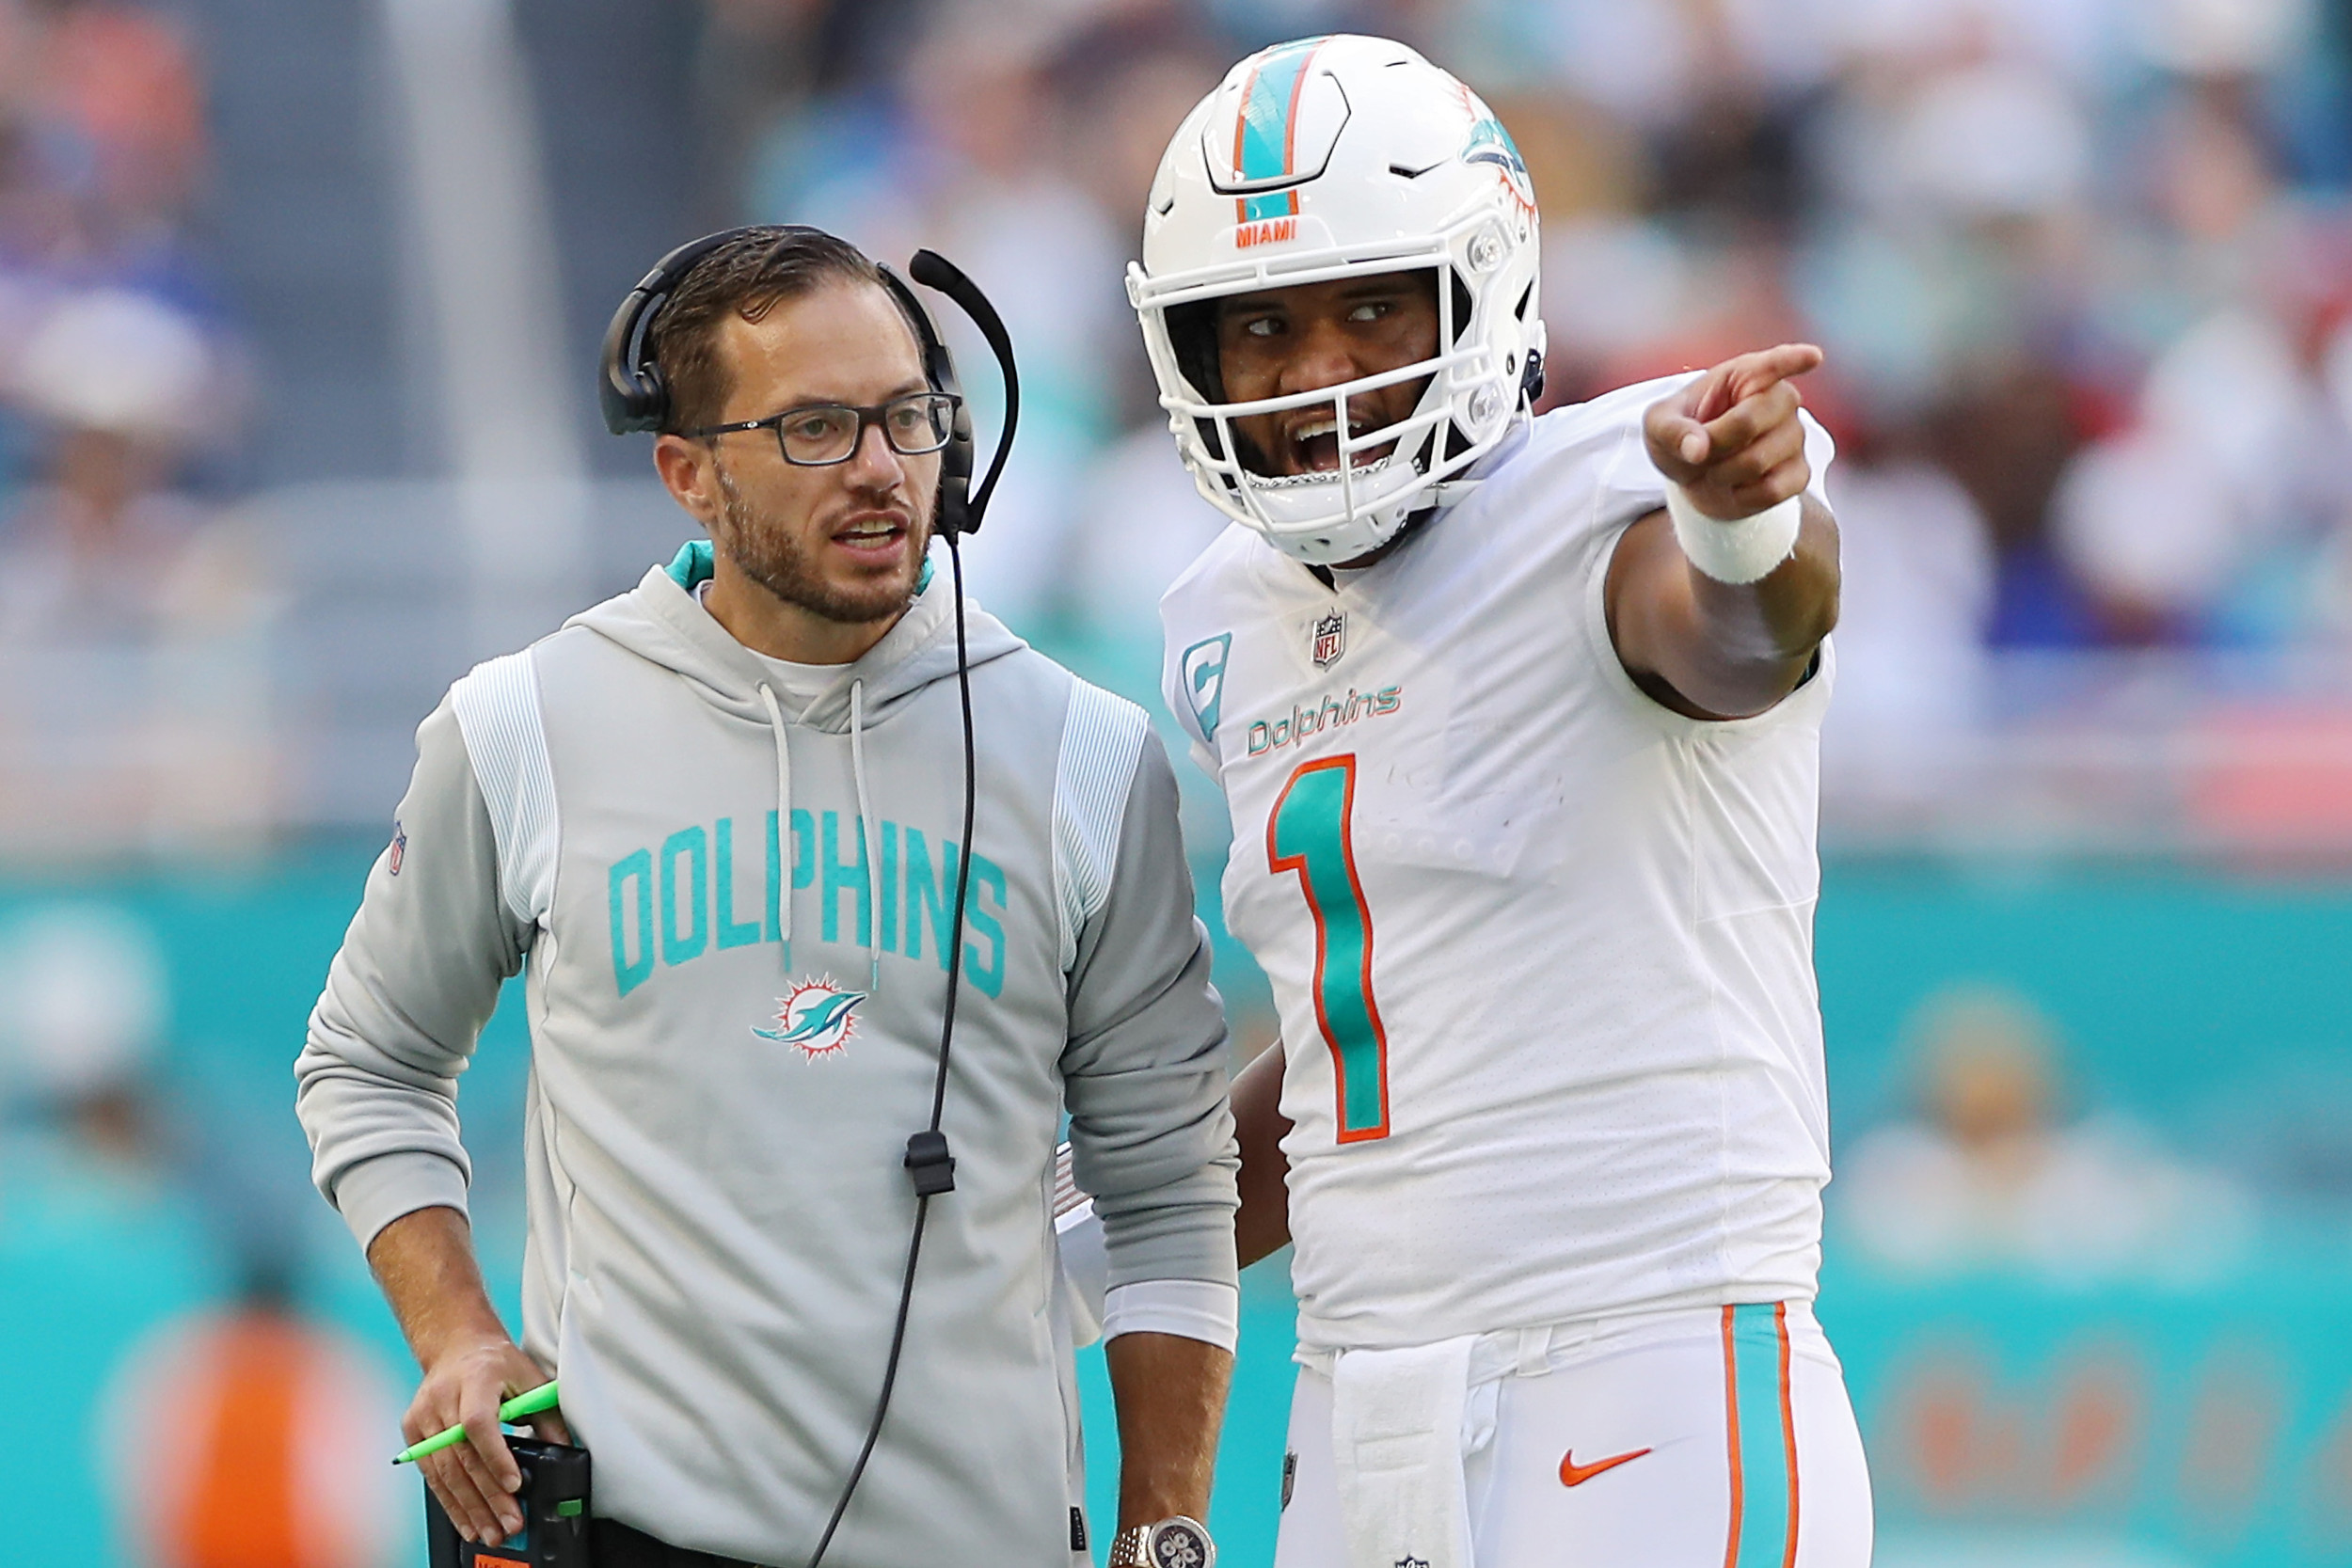 Miami Dolphins on 'Hard Knocks' Premiere Date, Schedule, How to Watch